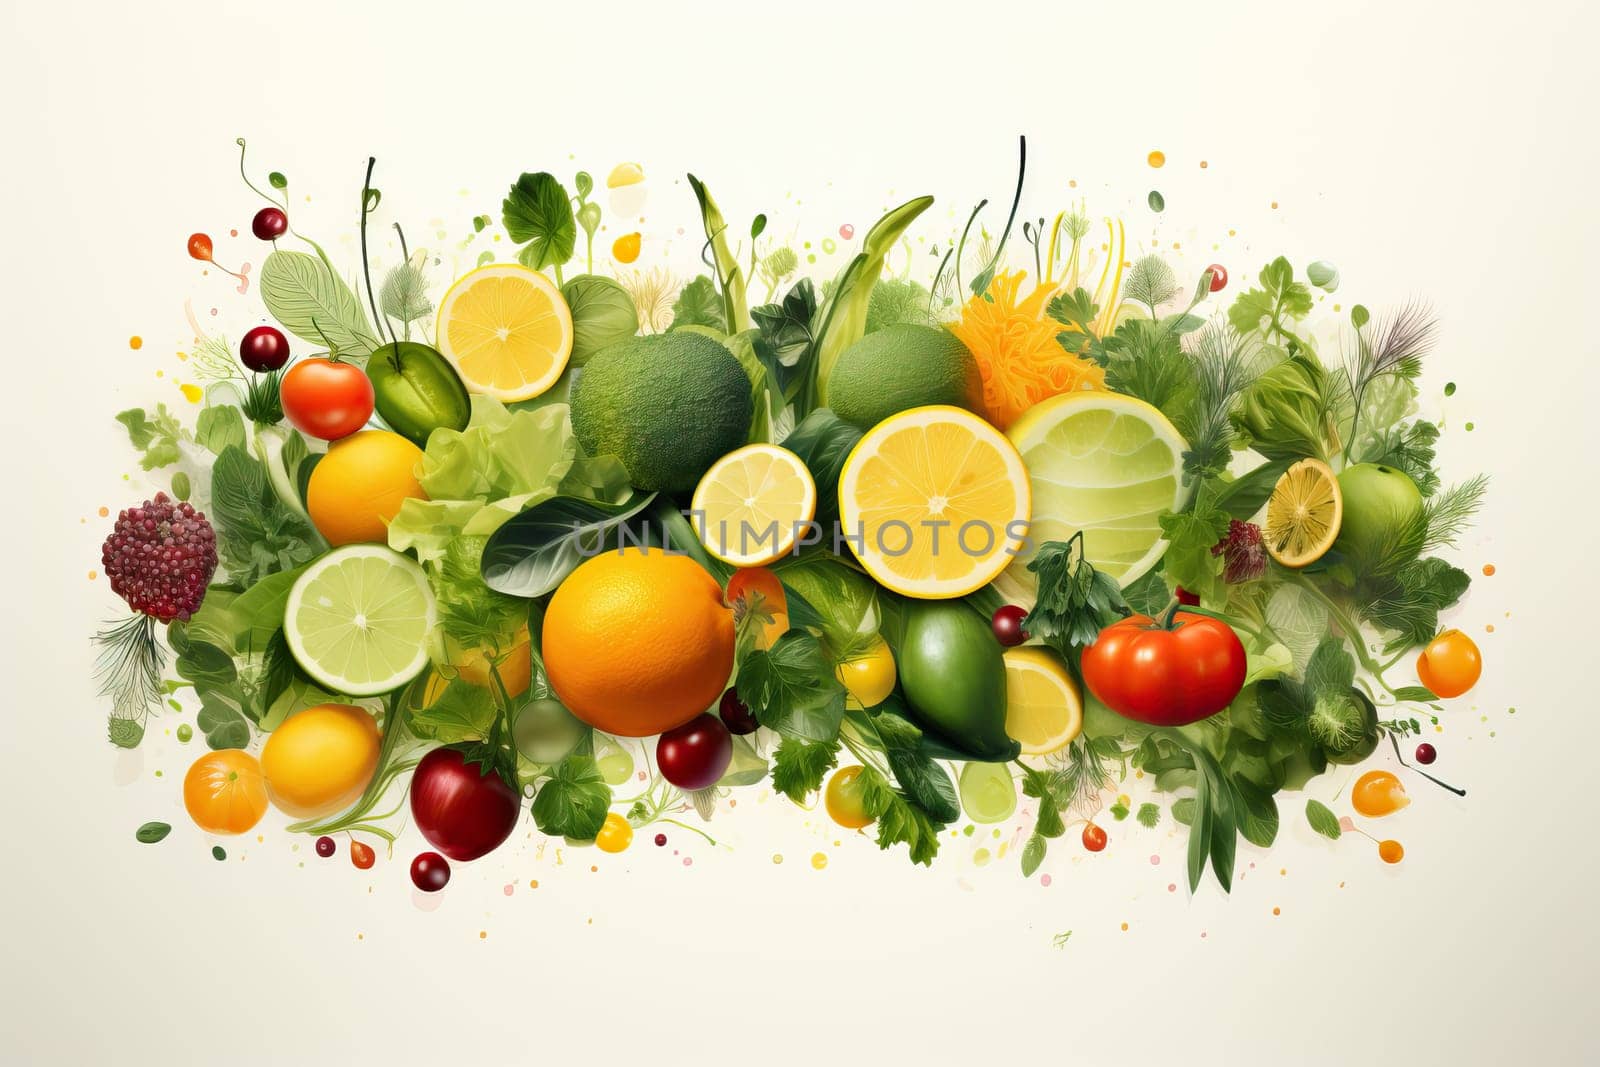 Healthy eating concept of fresh fruits and vegetables, top view of vegetables and fruits on background.